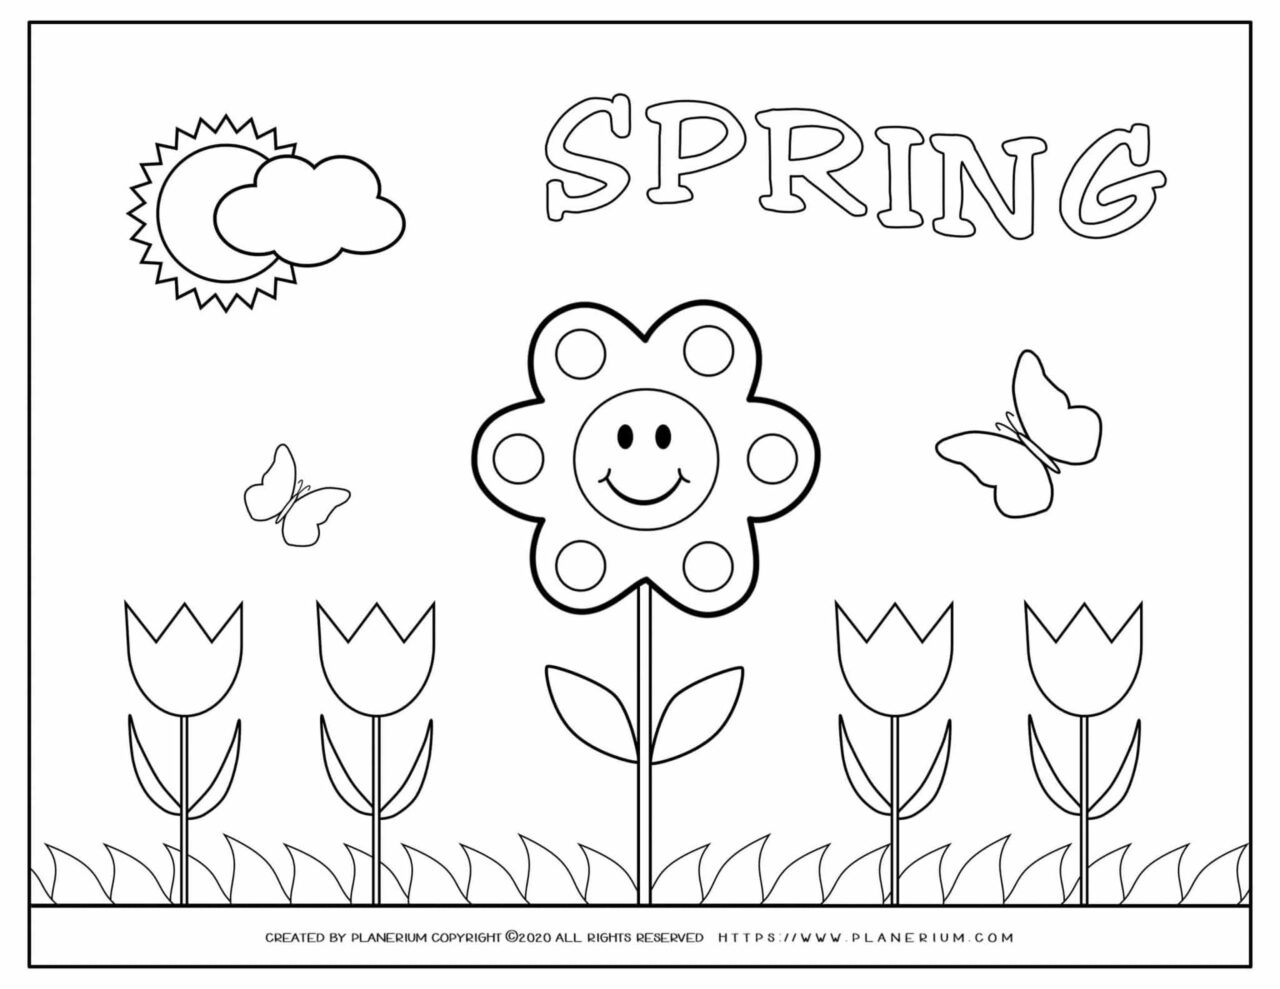 Spring coloring page with a smiling flower